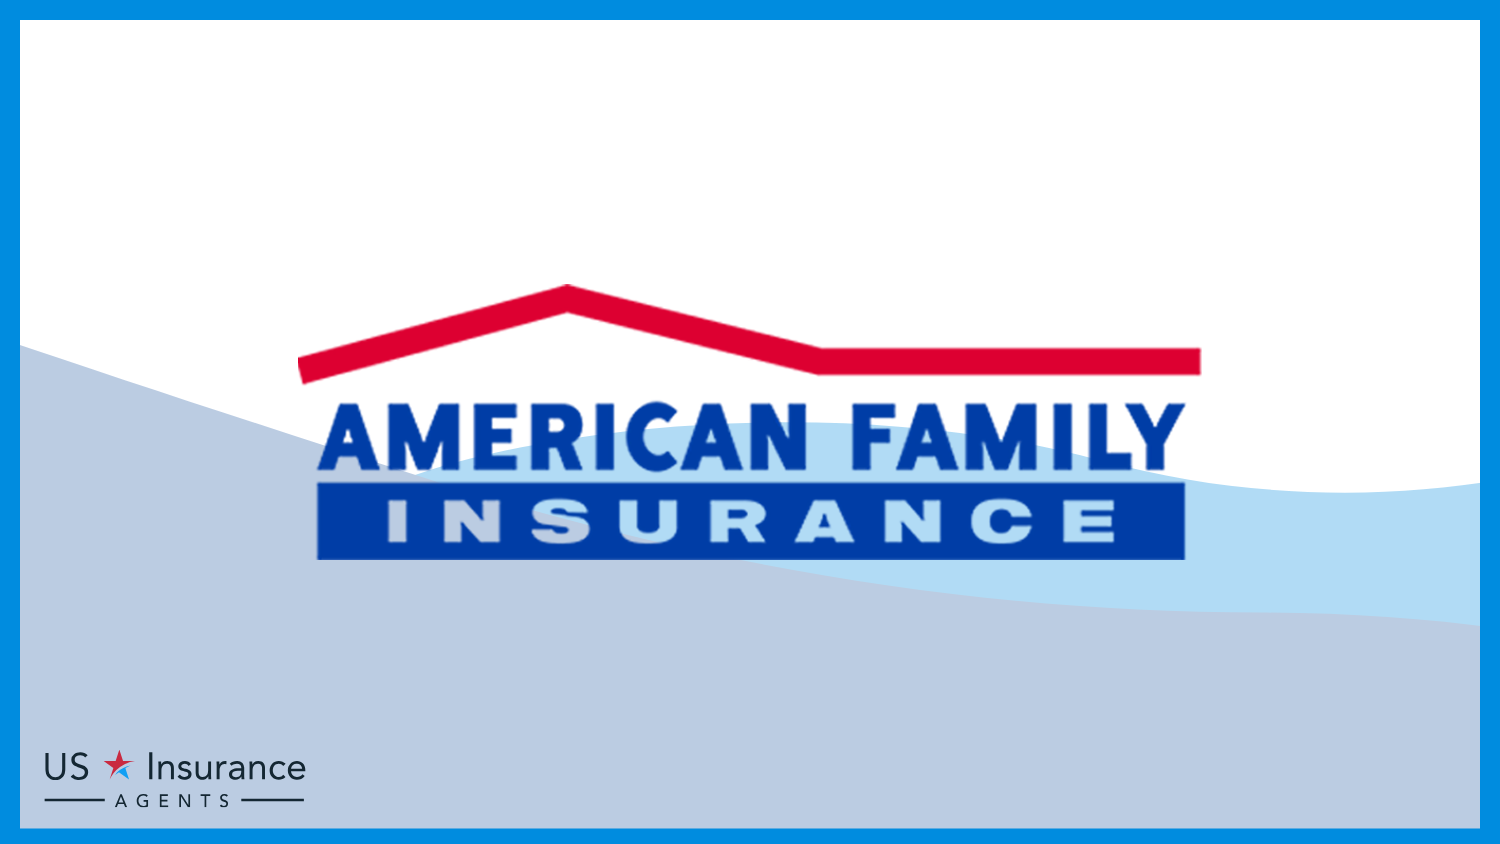 American Family: Best Business Insurance for Health Insurance Companies